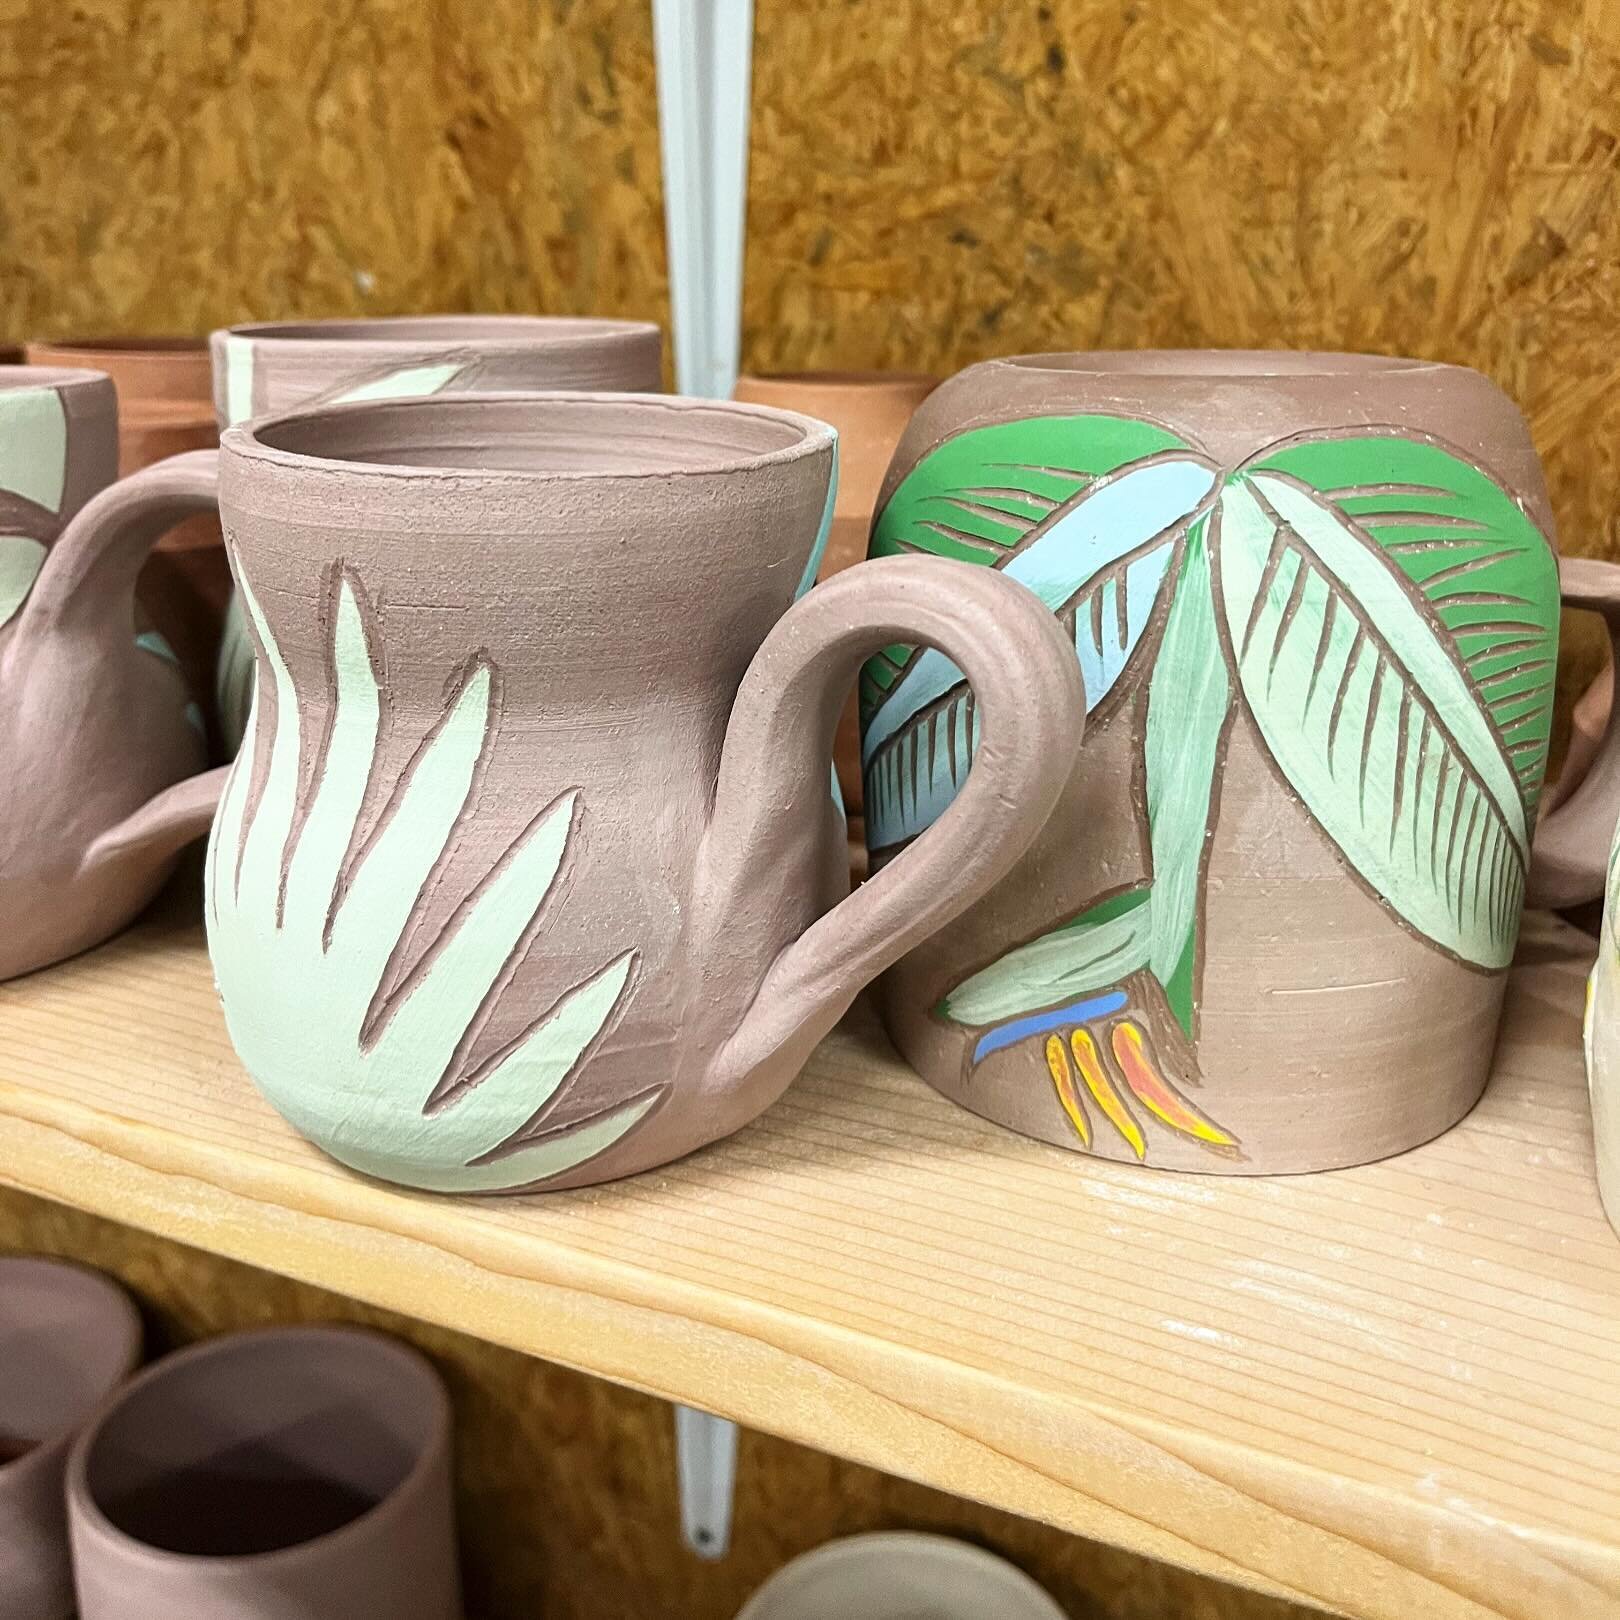 Getting ready for a bisque firing tonight. Soon I&rsquo;ll restock a few things at @_thegoodshop_ , including a palm and monstera mug design I haven&rsquo;t made in a while! 

Some of these may be available at our upcoming open studio night or they m